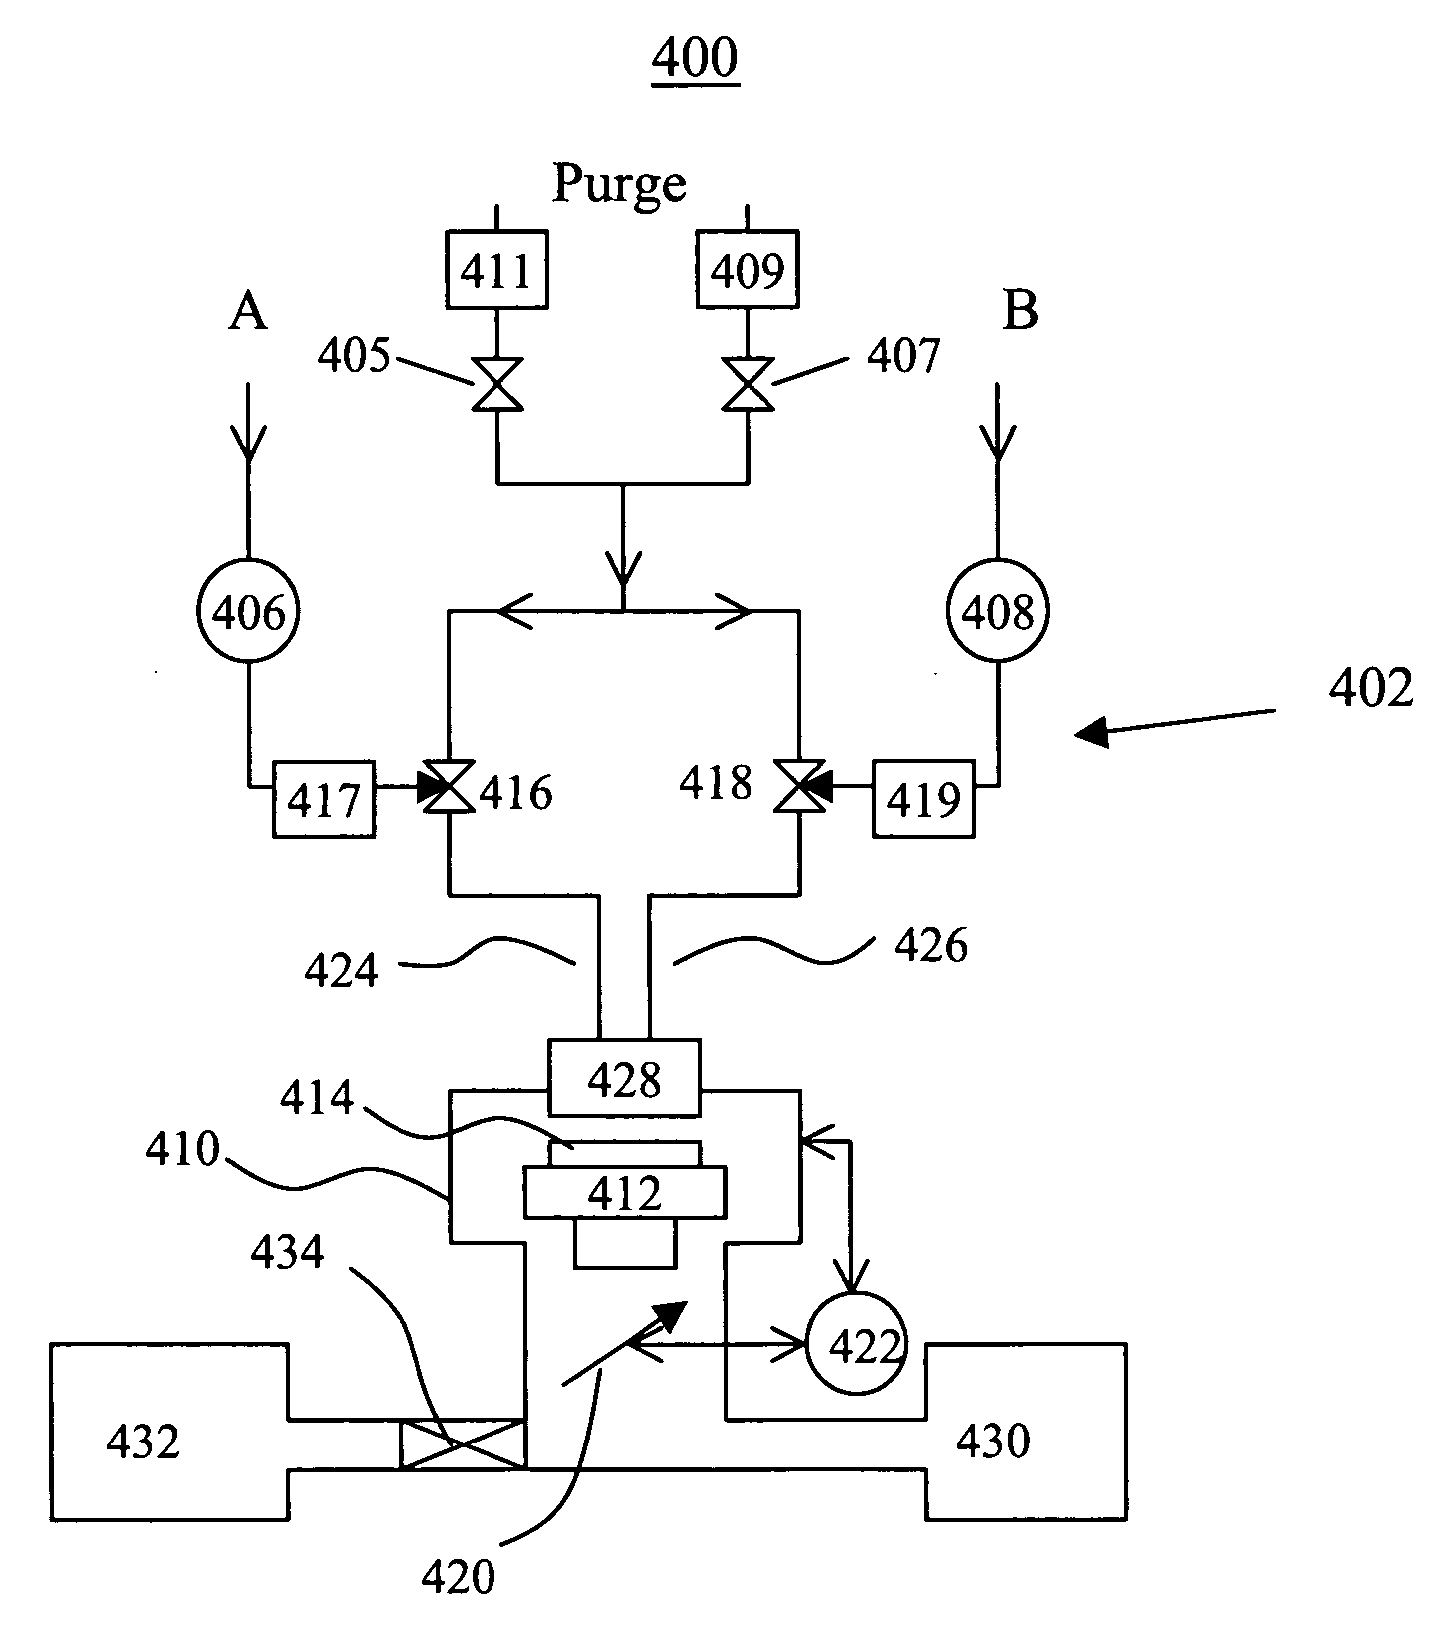 Methods and apparatus for cycle time improvements for atomic layer deposition